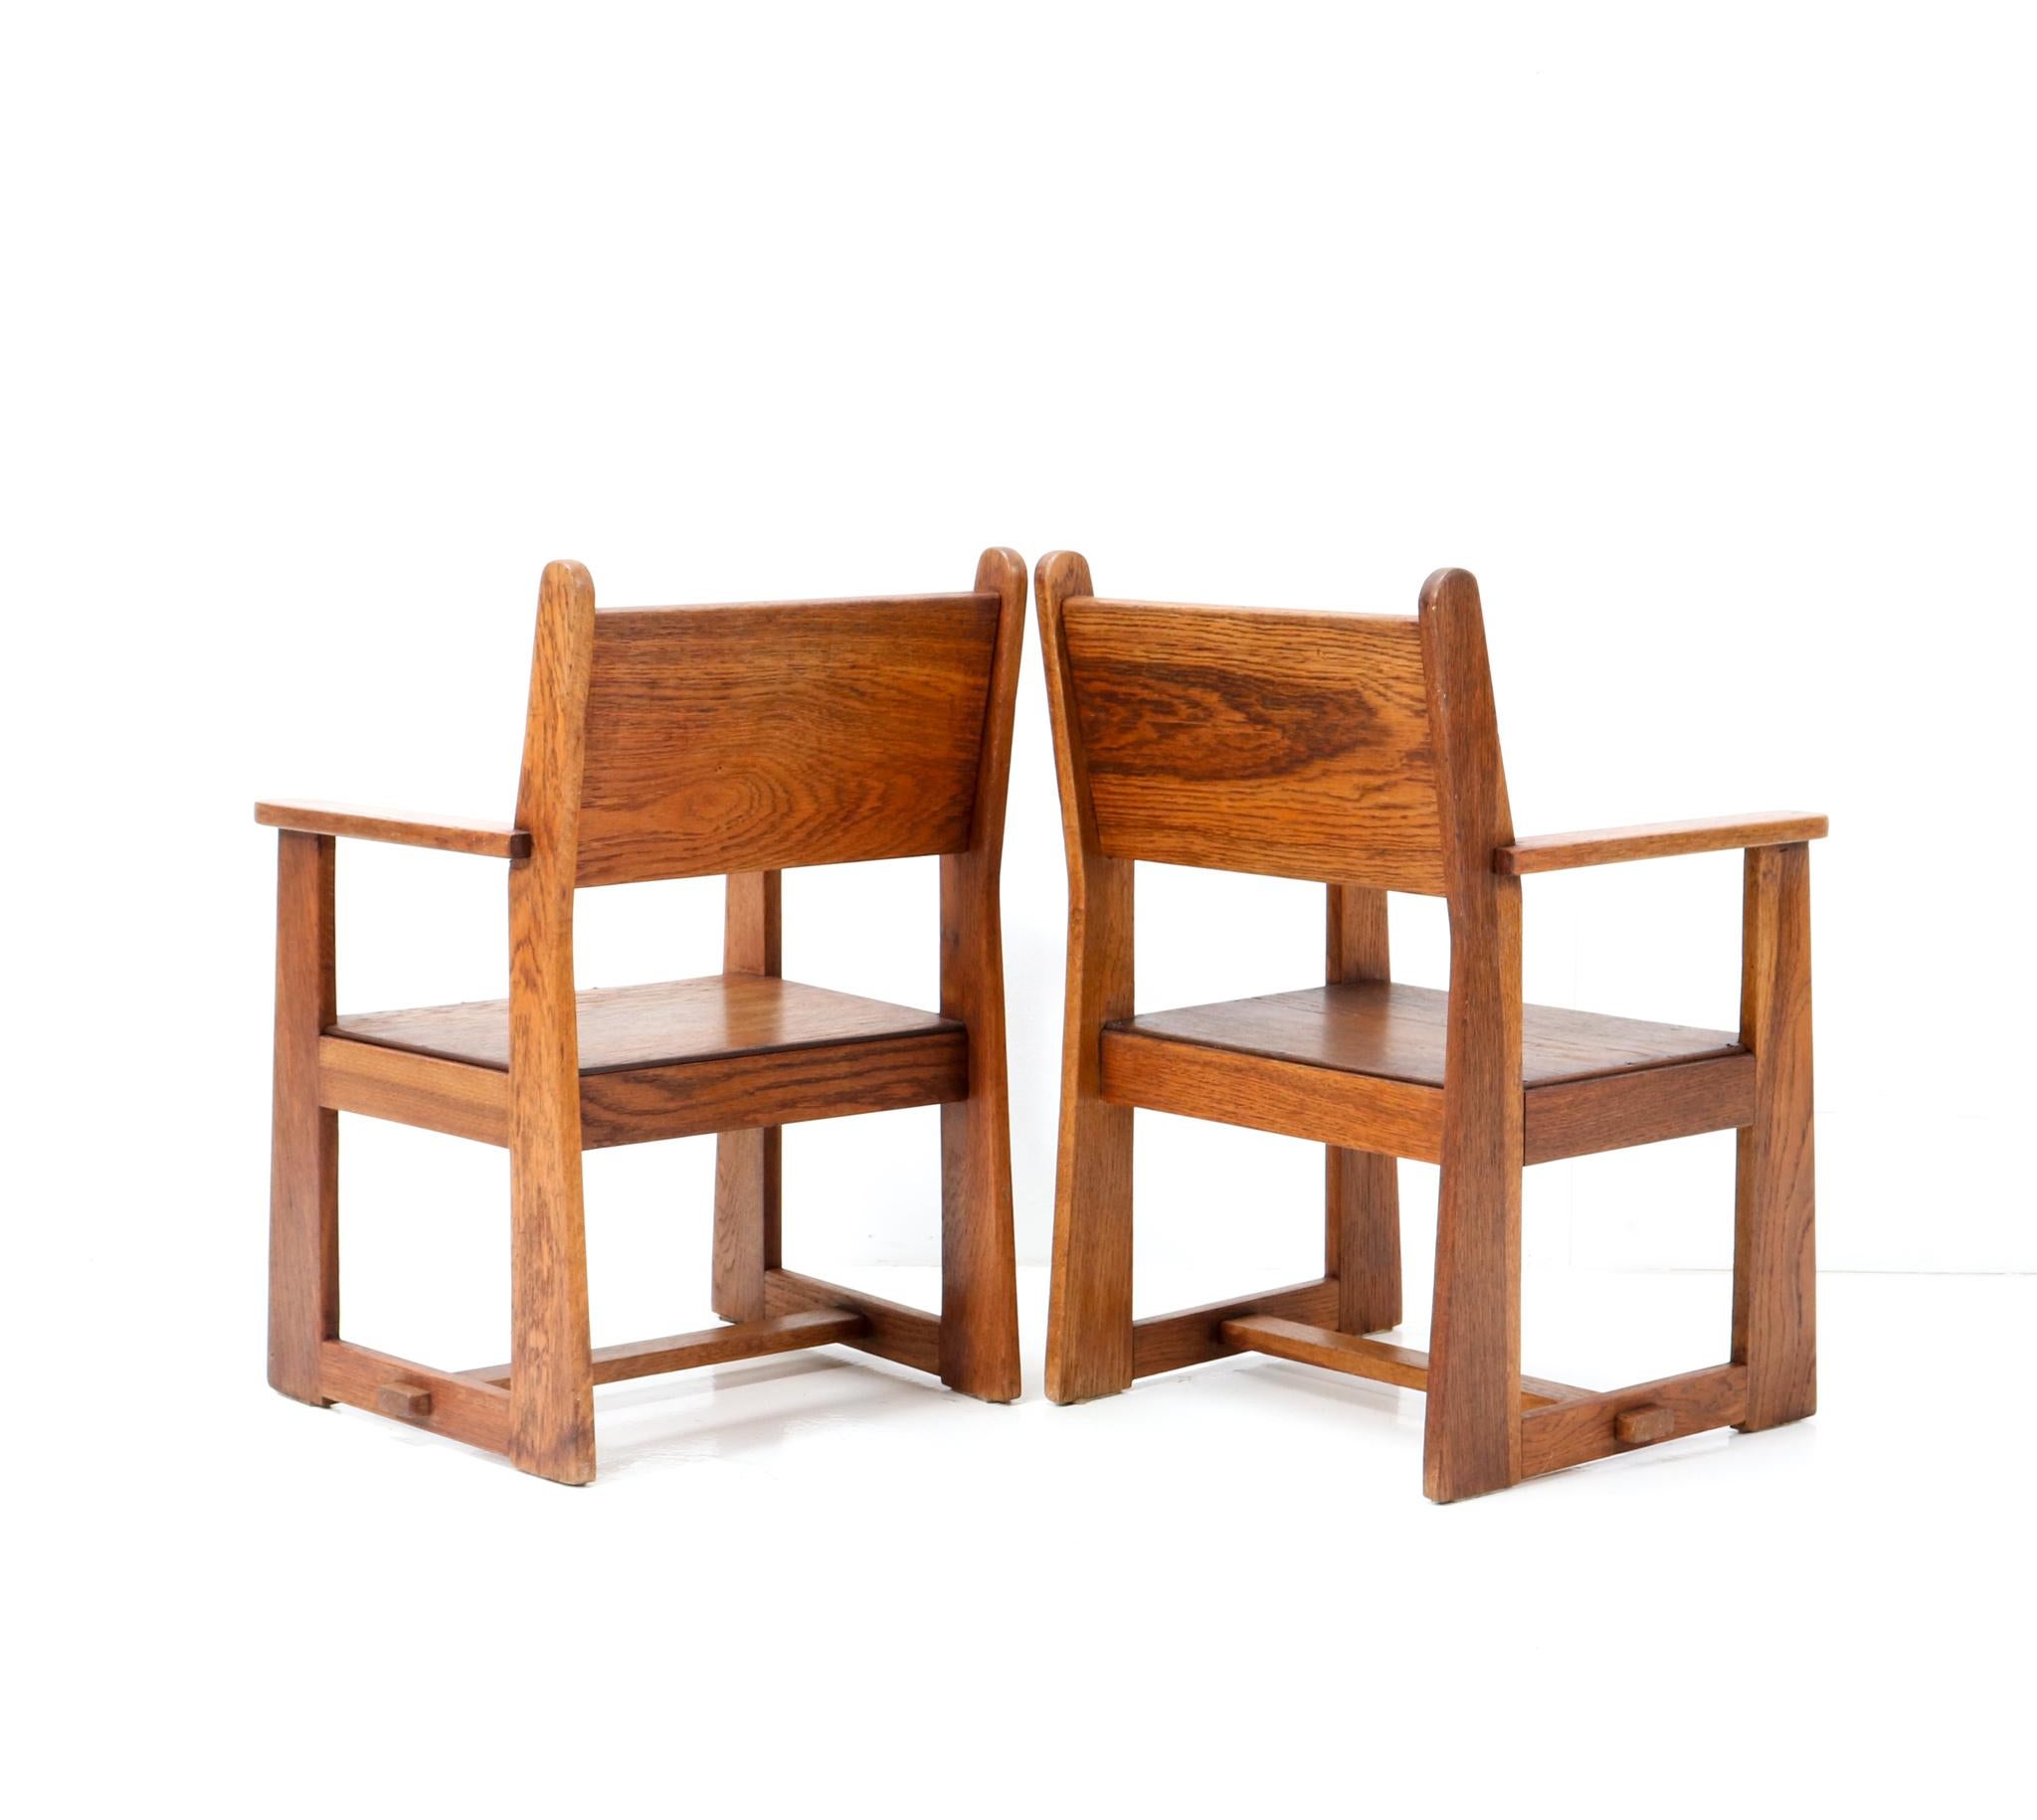 Two Art Deco Modernist Children's Armchairs by Jan Wils for Eik en Linden, 1918 In Good Condition For Sale In Amsterdam, NL